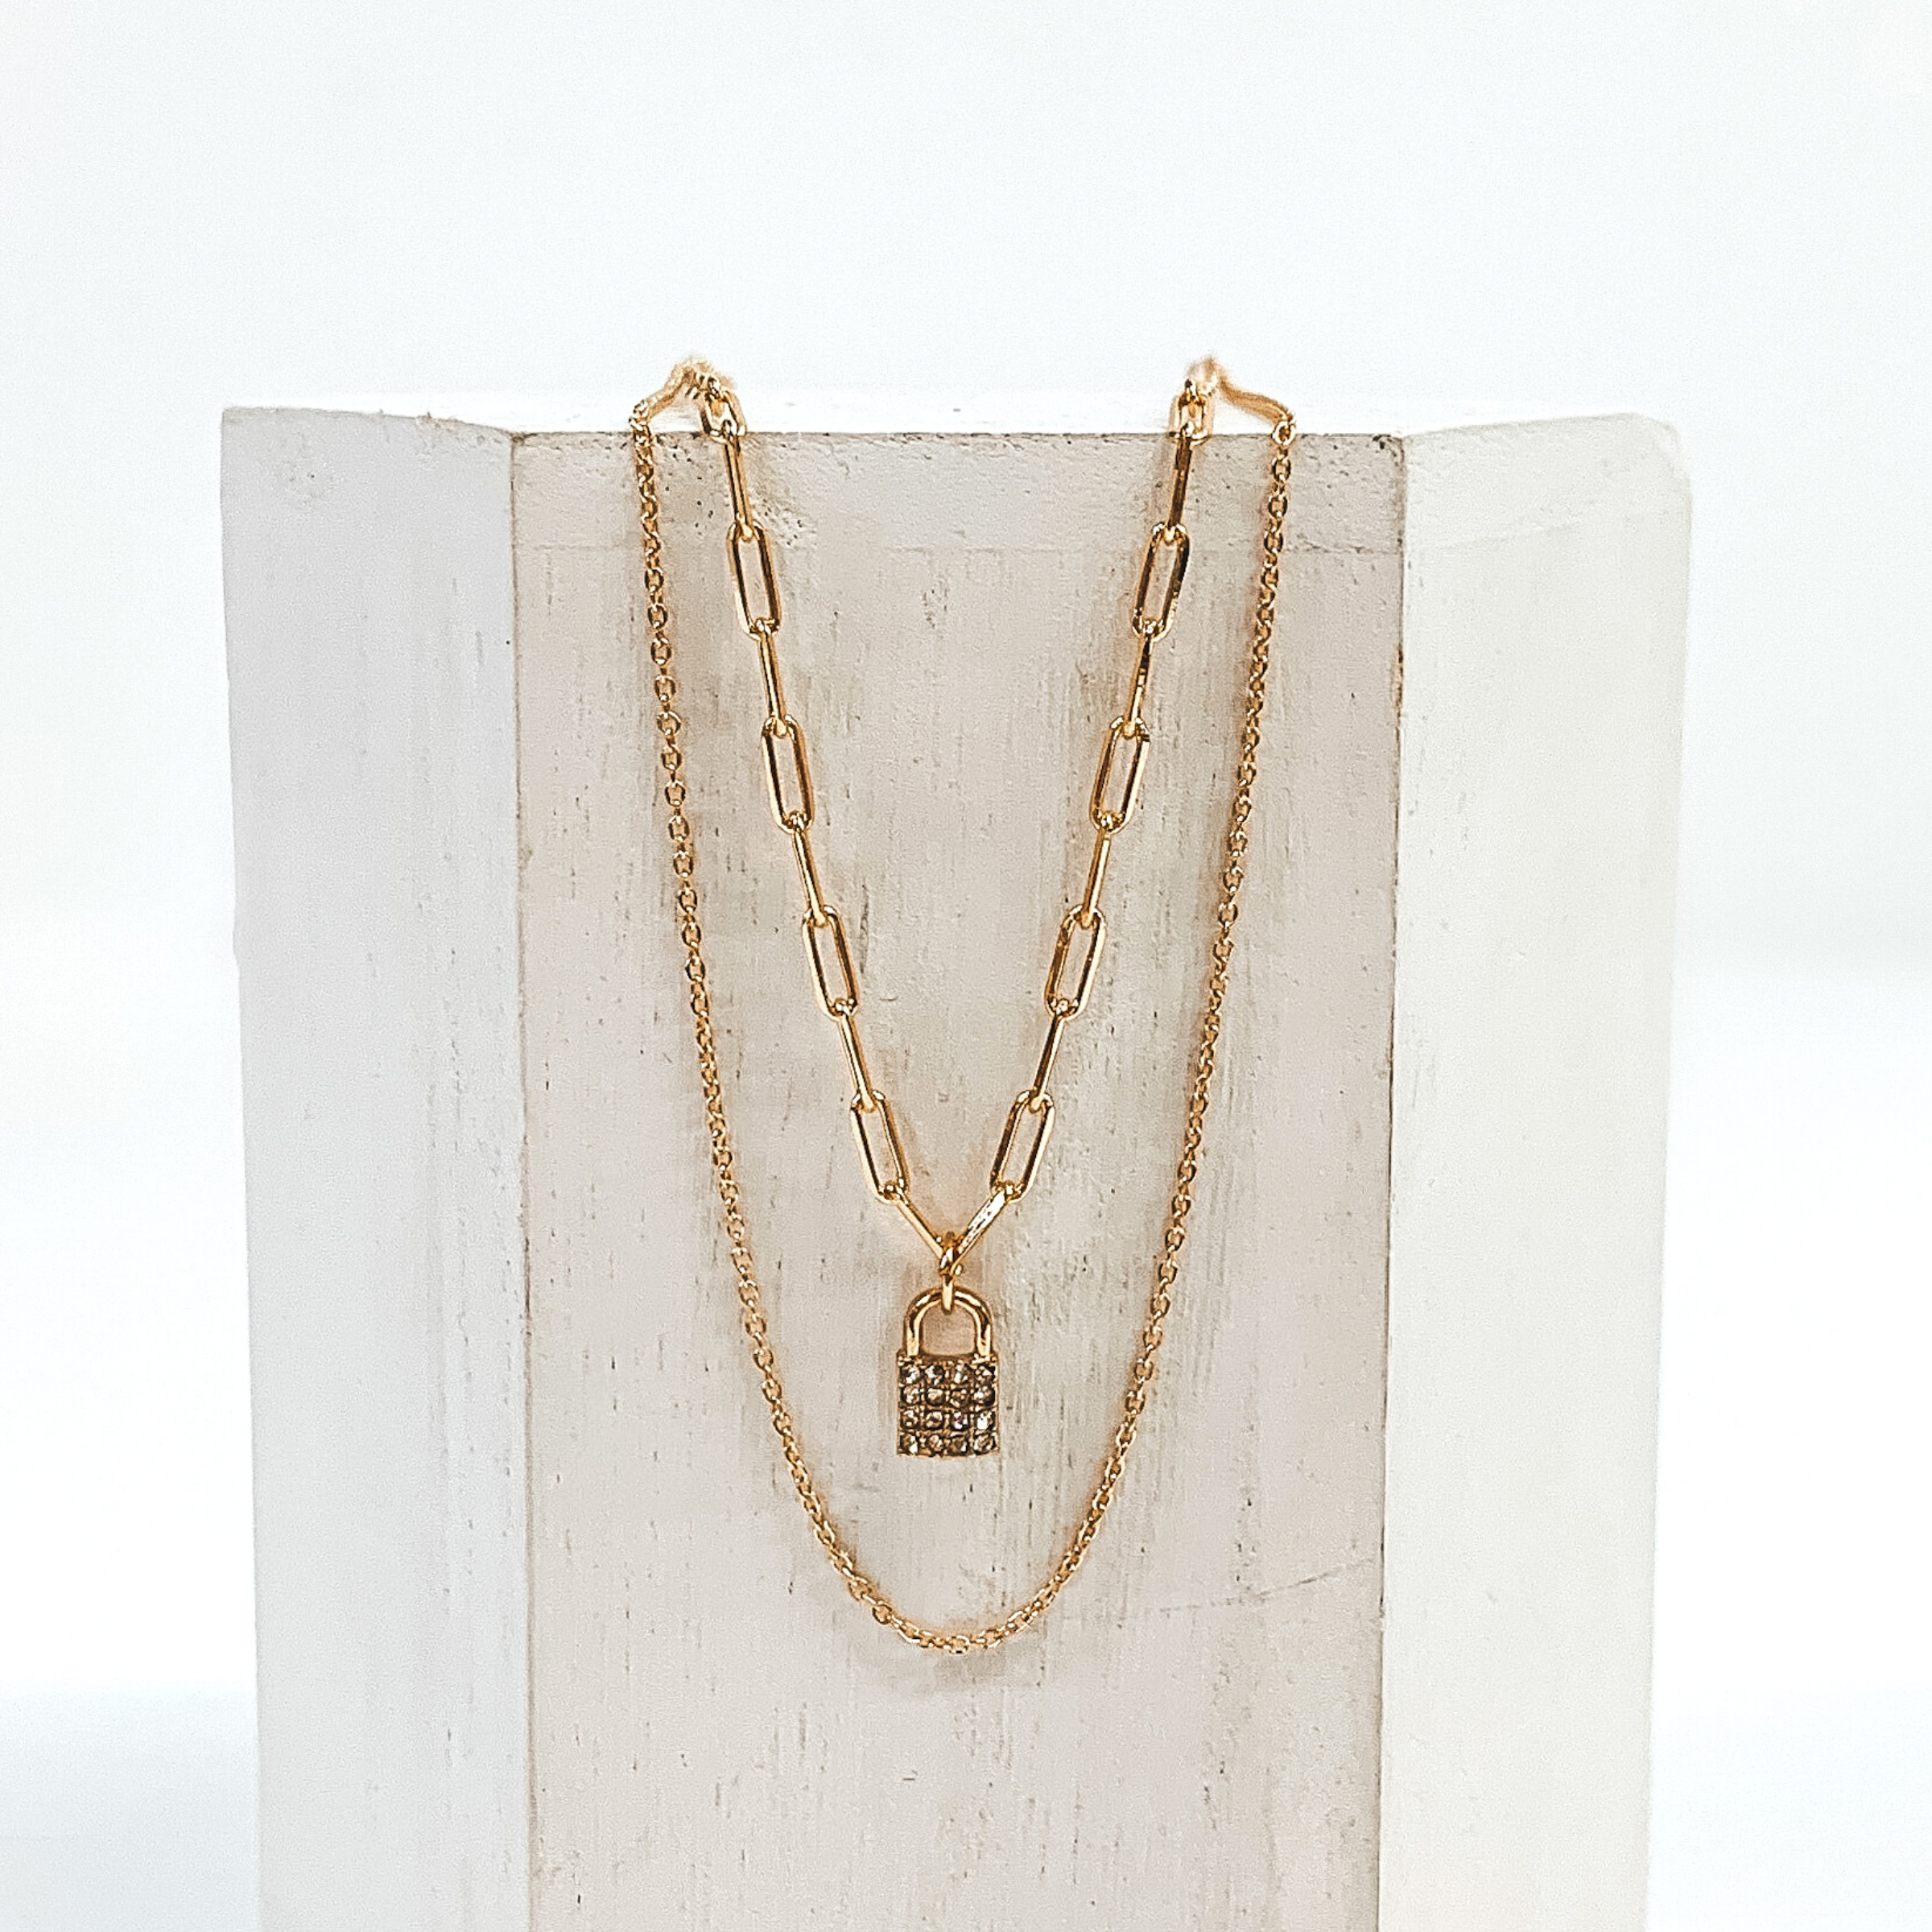 Gold, double stranded necklace. The longer chain is a plain gold chain. The shorter paperclip chain has a crystalized lock charm. This necklace is pictured laying on a white block on a white background. 